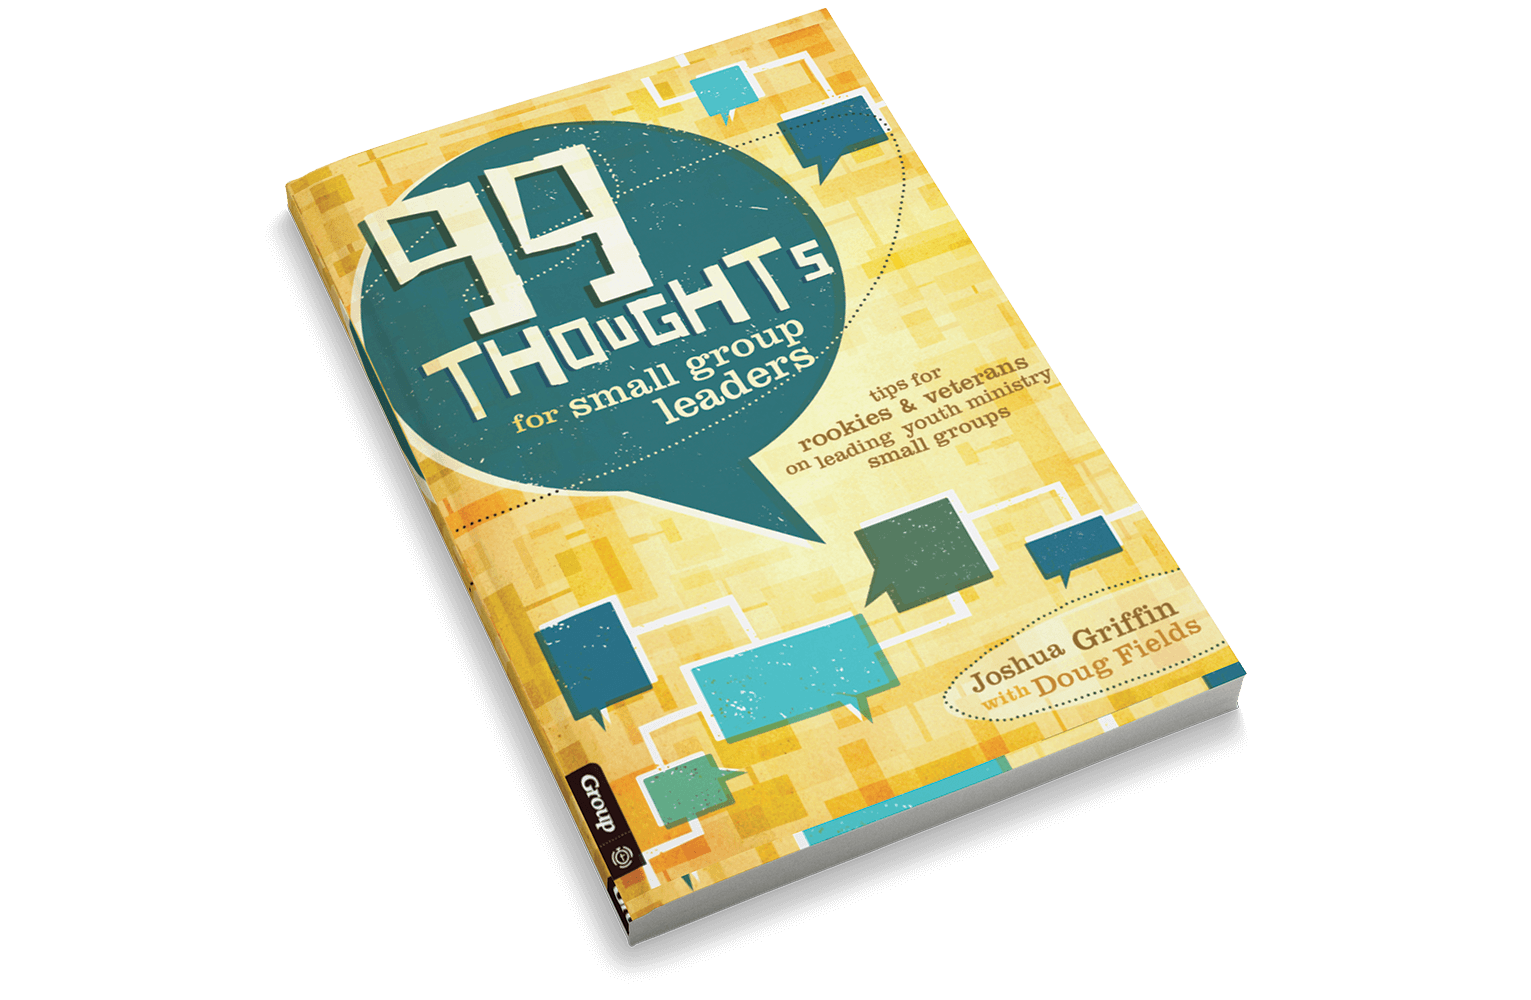 99 Thoughts for Small Group Leaders: Tips for Rookies & Veterans on Leading Youth Ministry Small Groups